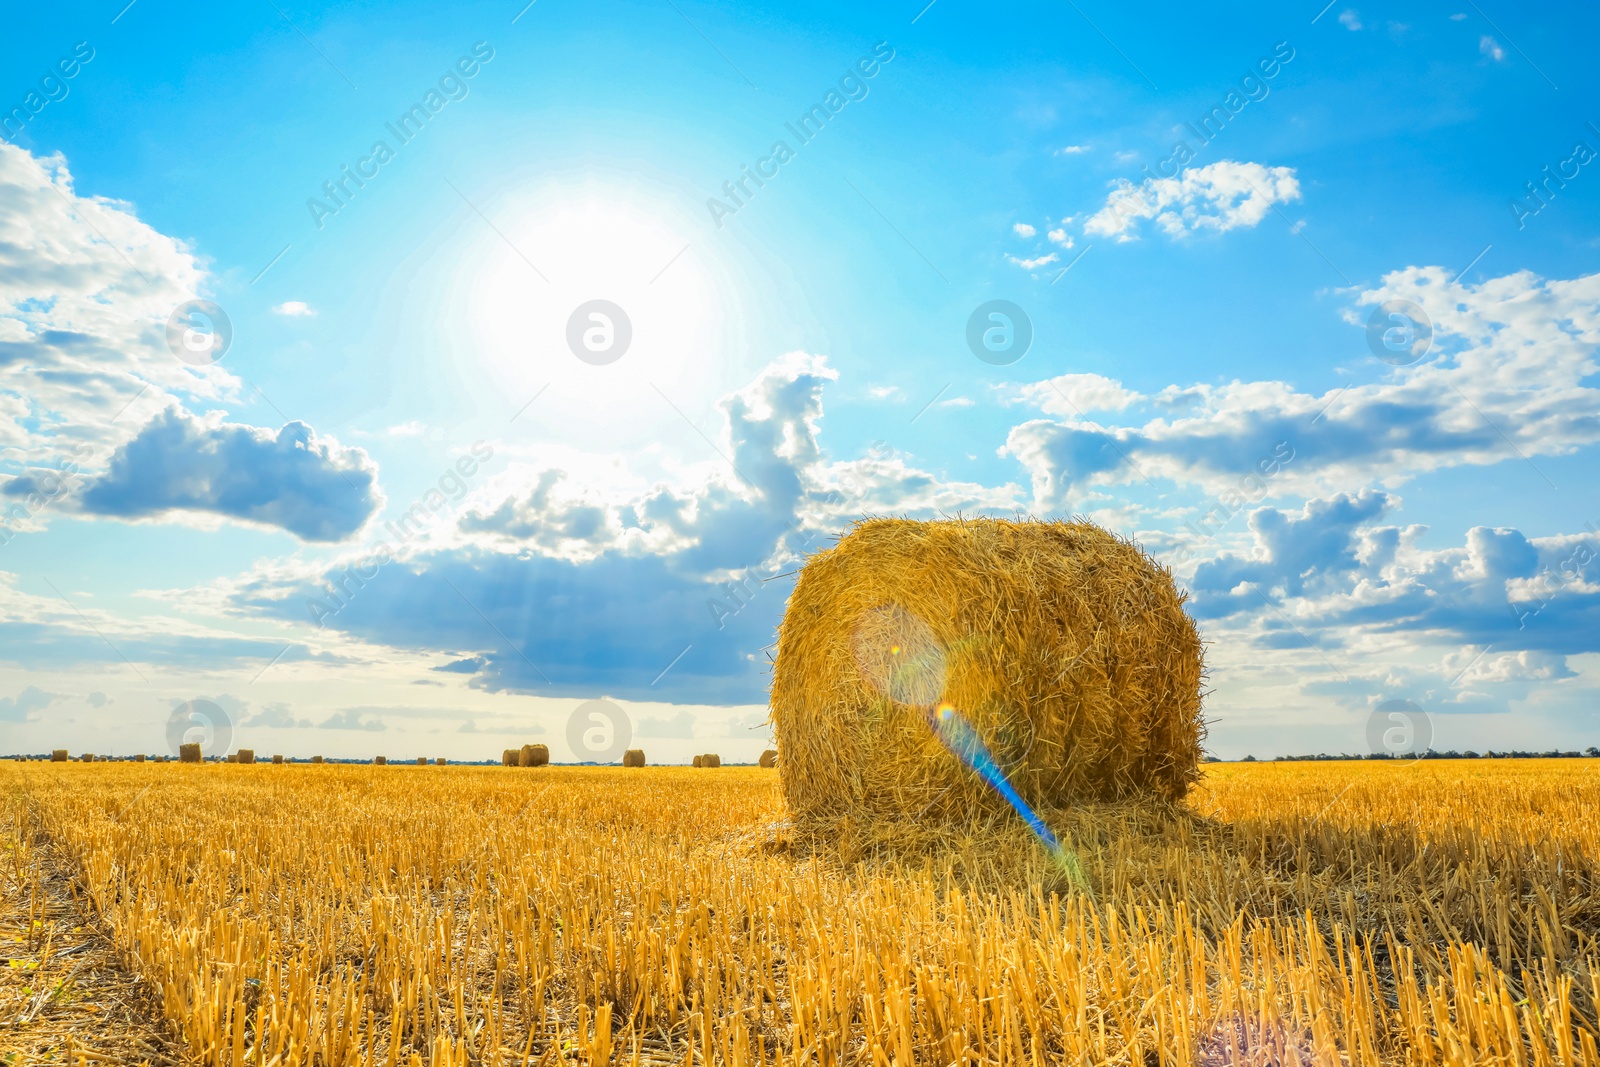 Image of Hay bale in golden field under blue sky on sunny day